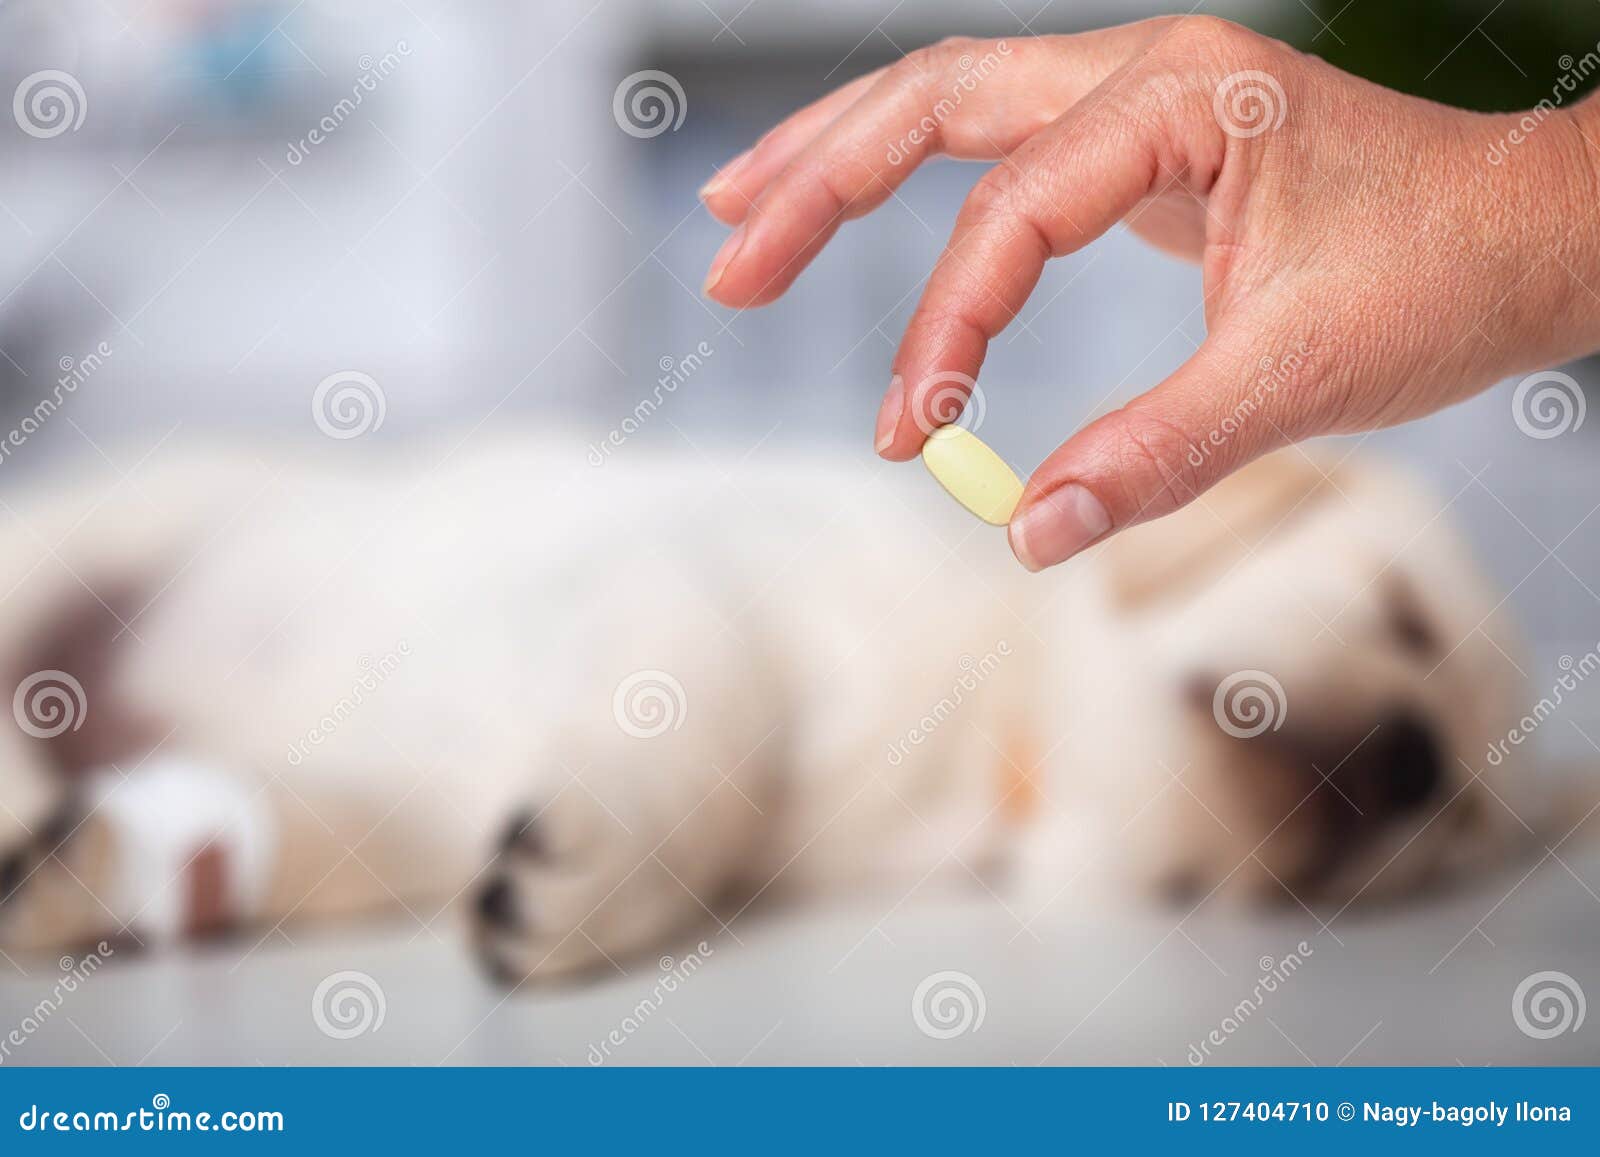 woman hand holding medication for veterinary purposes